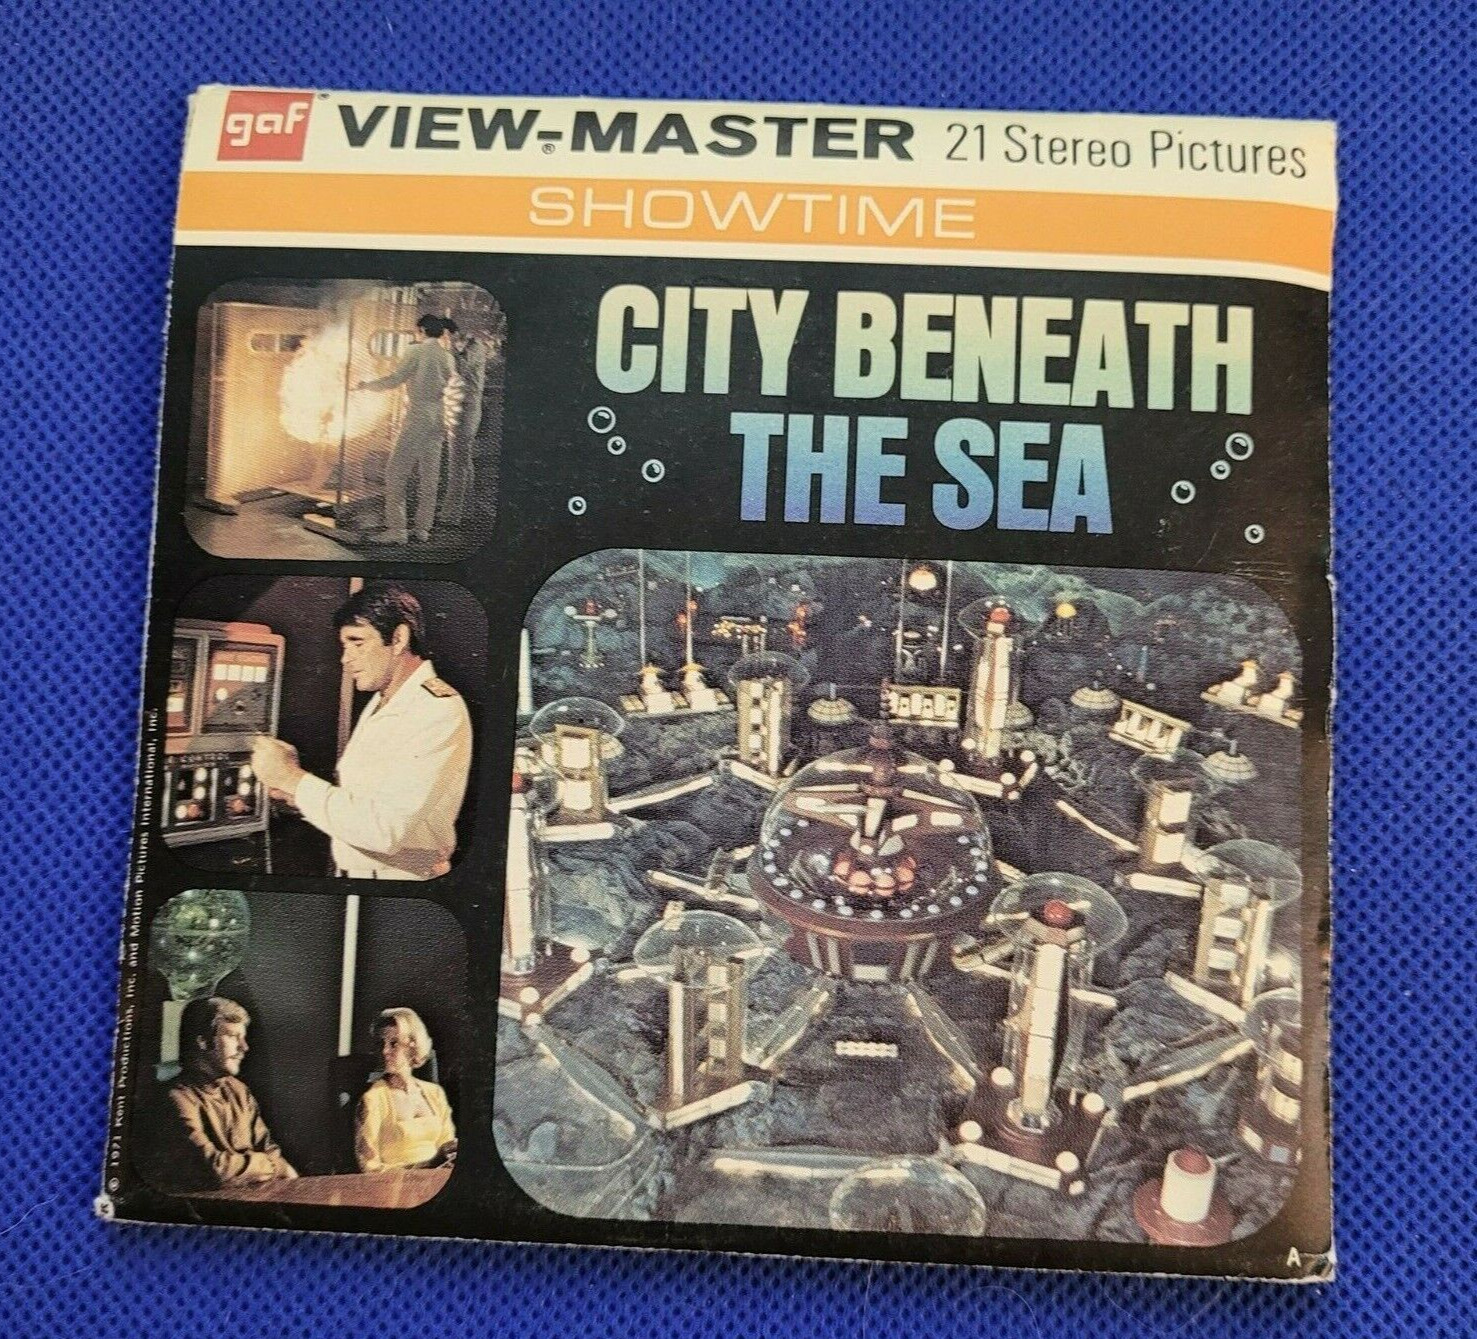 COLOR B496 City Beneath the Sea Movie Irwin Allen Epic view-master Reels Packet